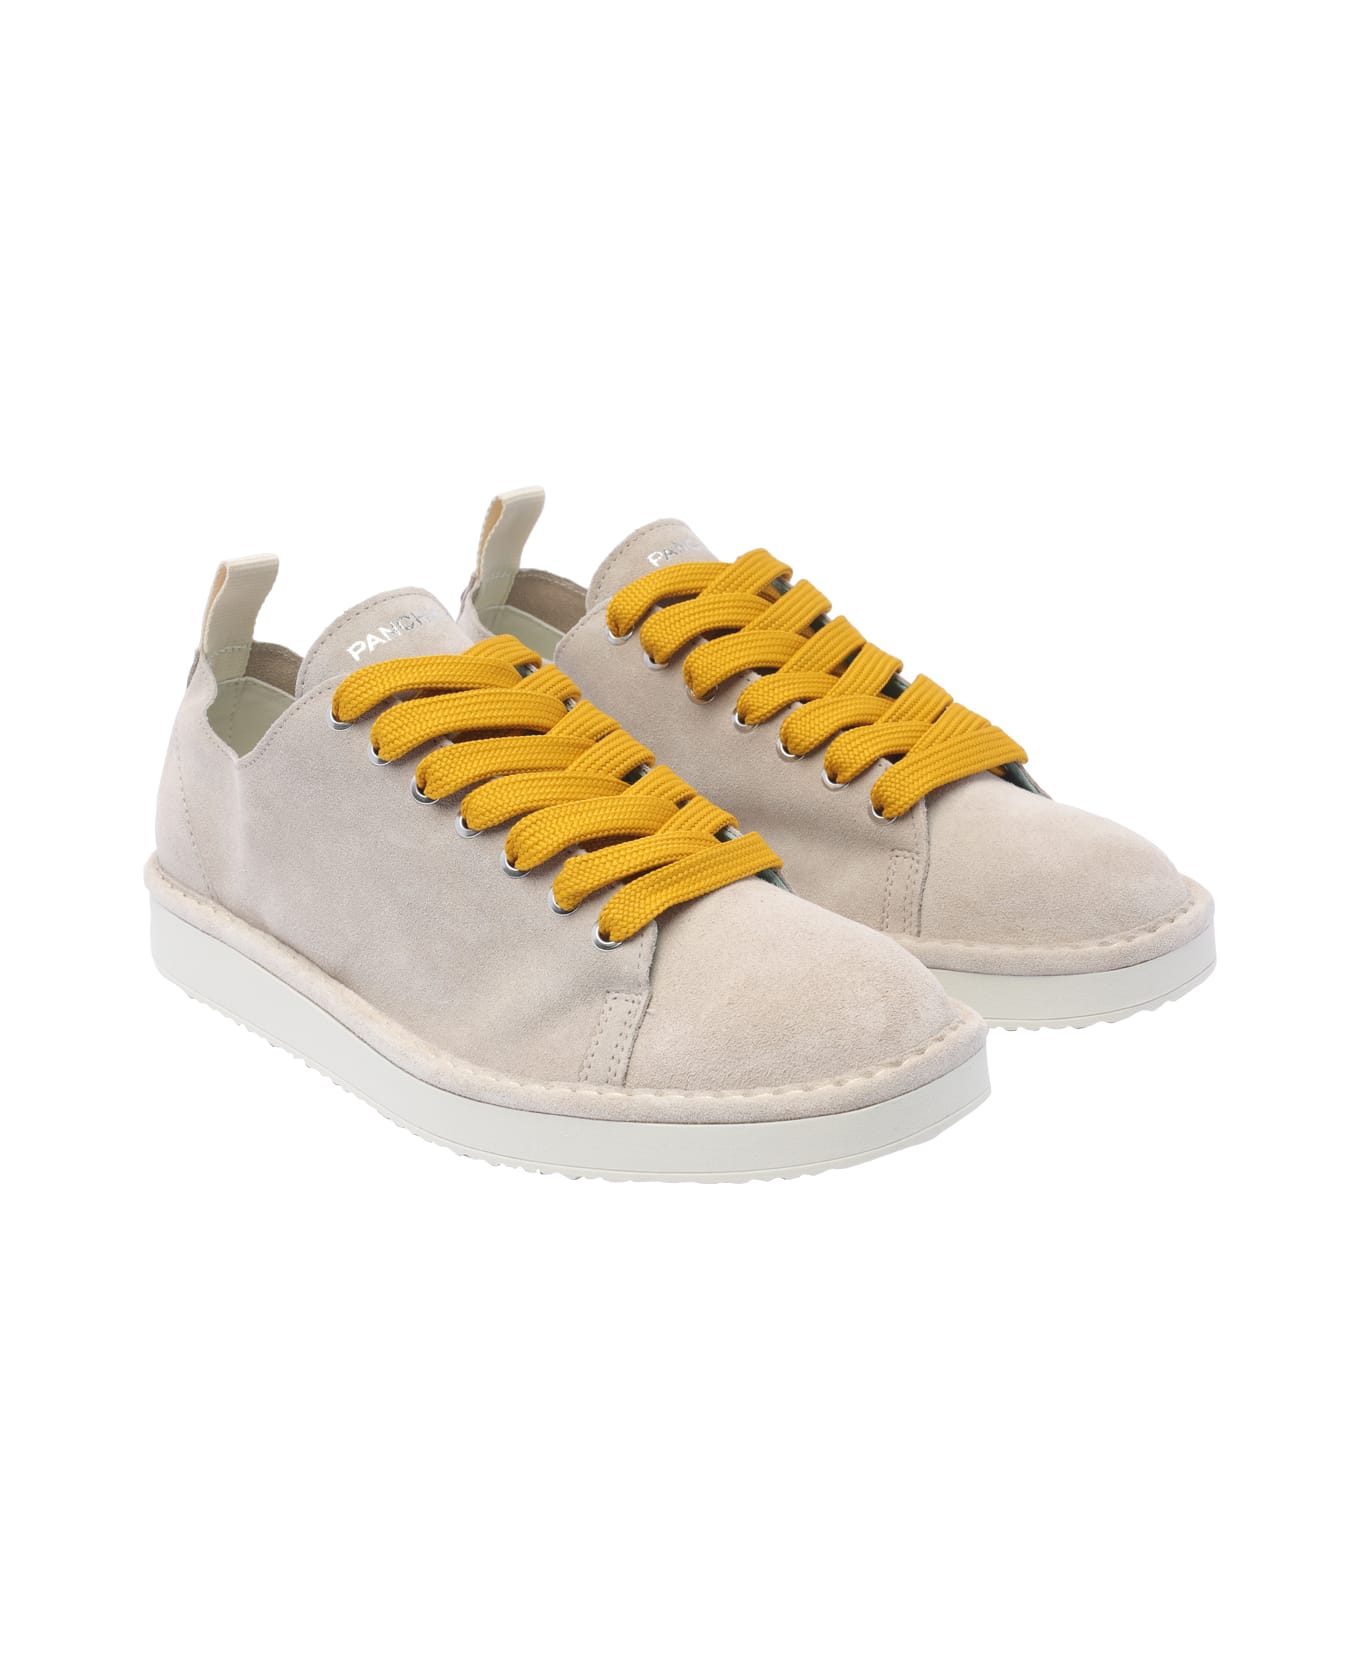 Panchic Laced Up Shoes - Beige